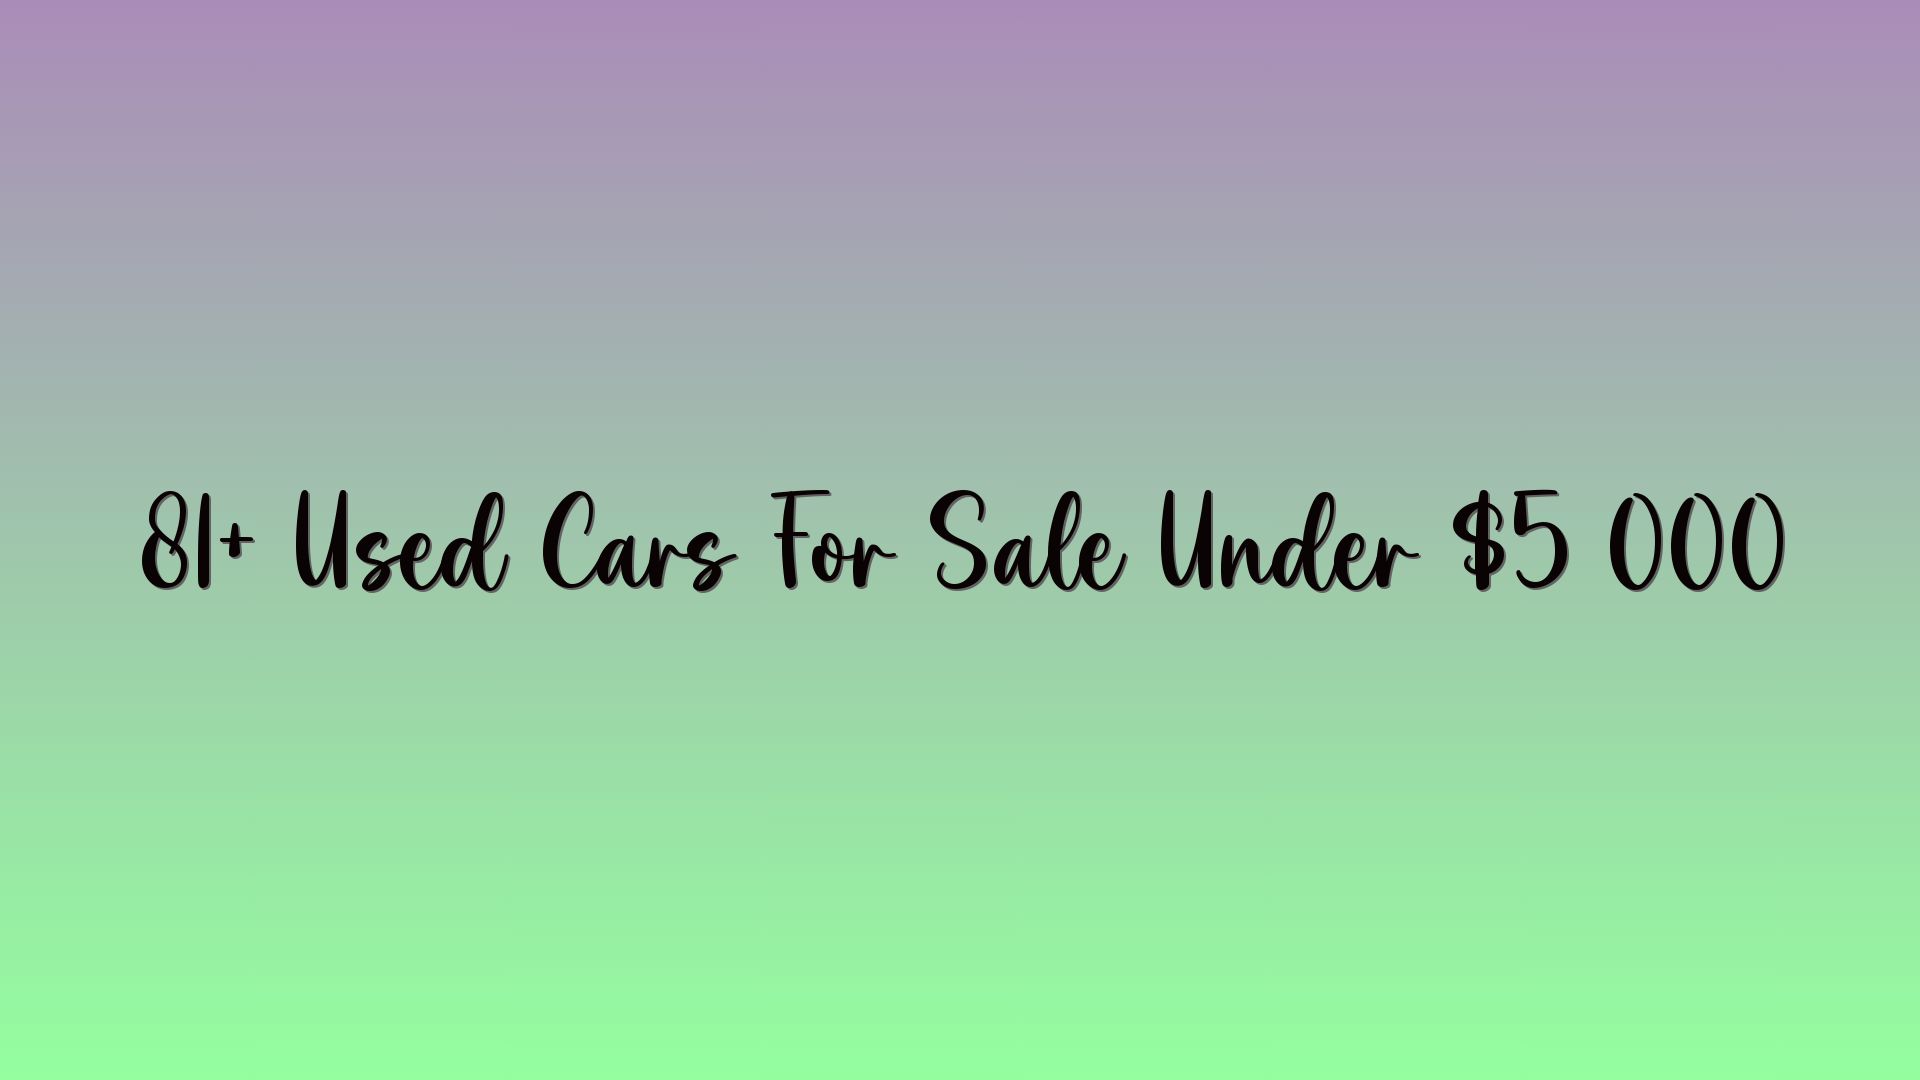 81+ Used Cars For Sale Under $5 000